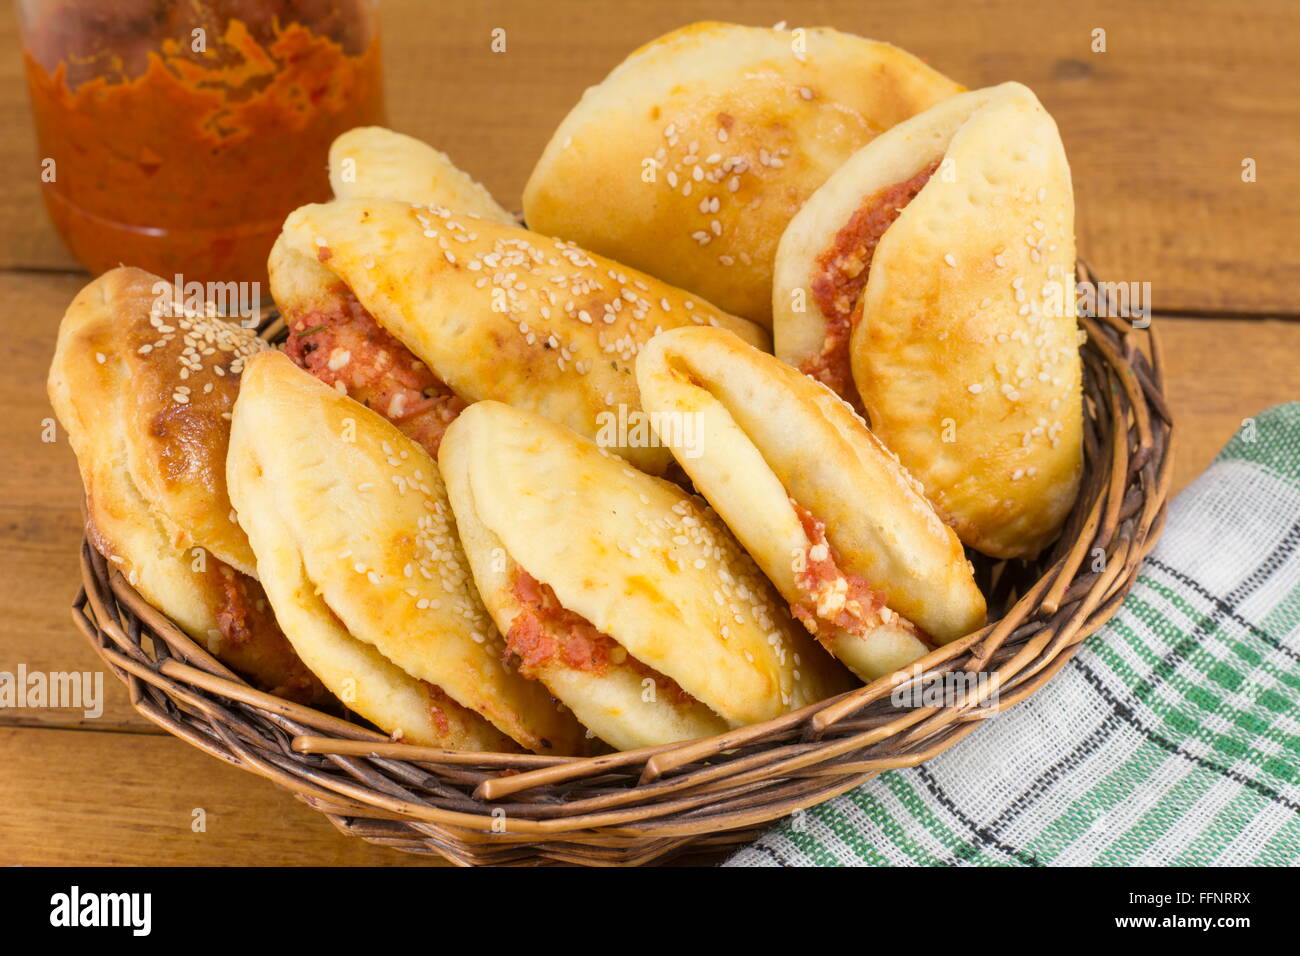 pizza buns with small sausages and pepperoni in a wooden basket Stock Photo